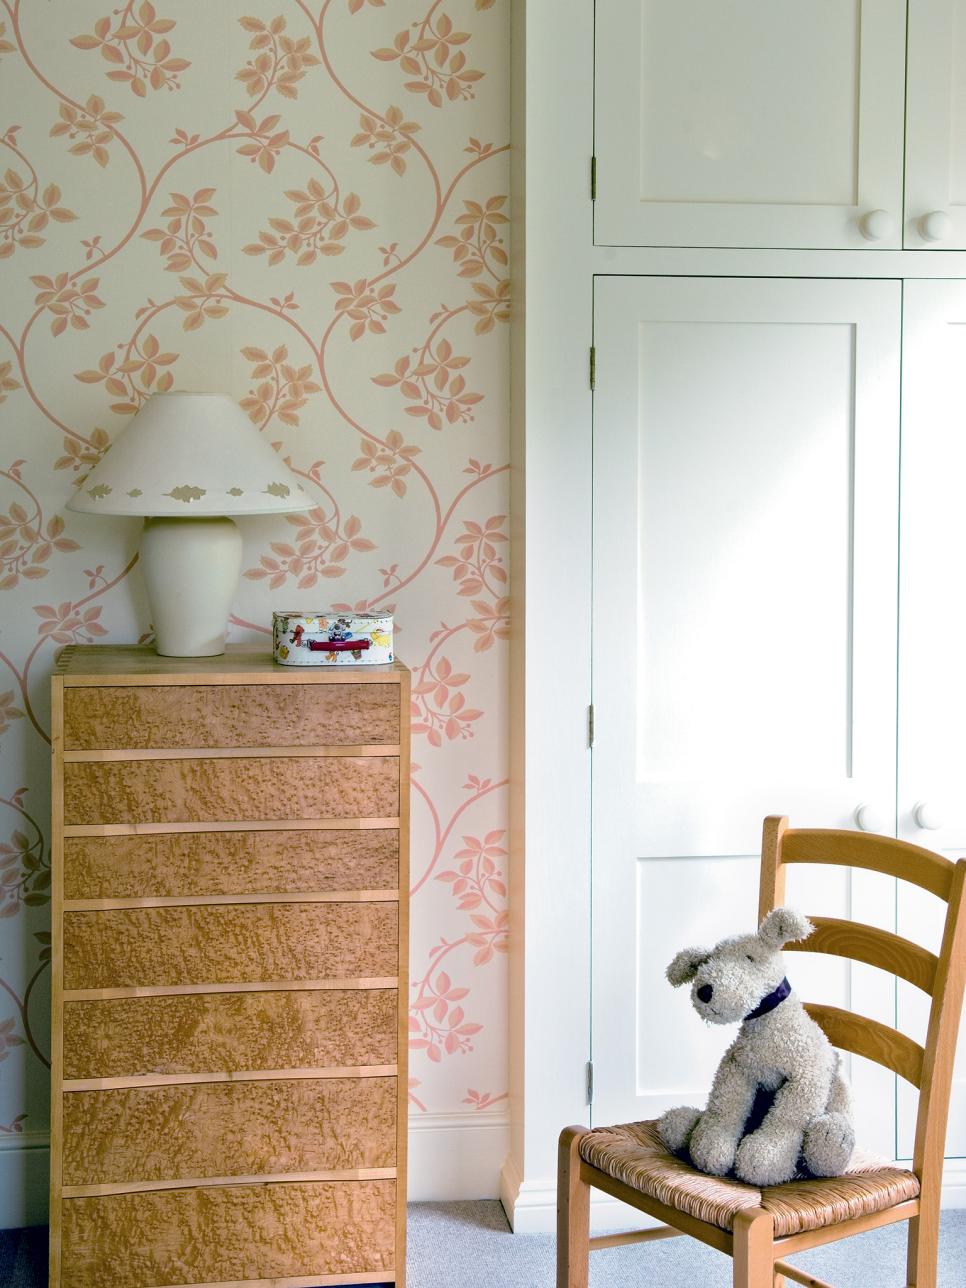 Girl's Bedroom With Floral Wallpaper and Wood Dresser